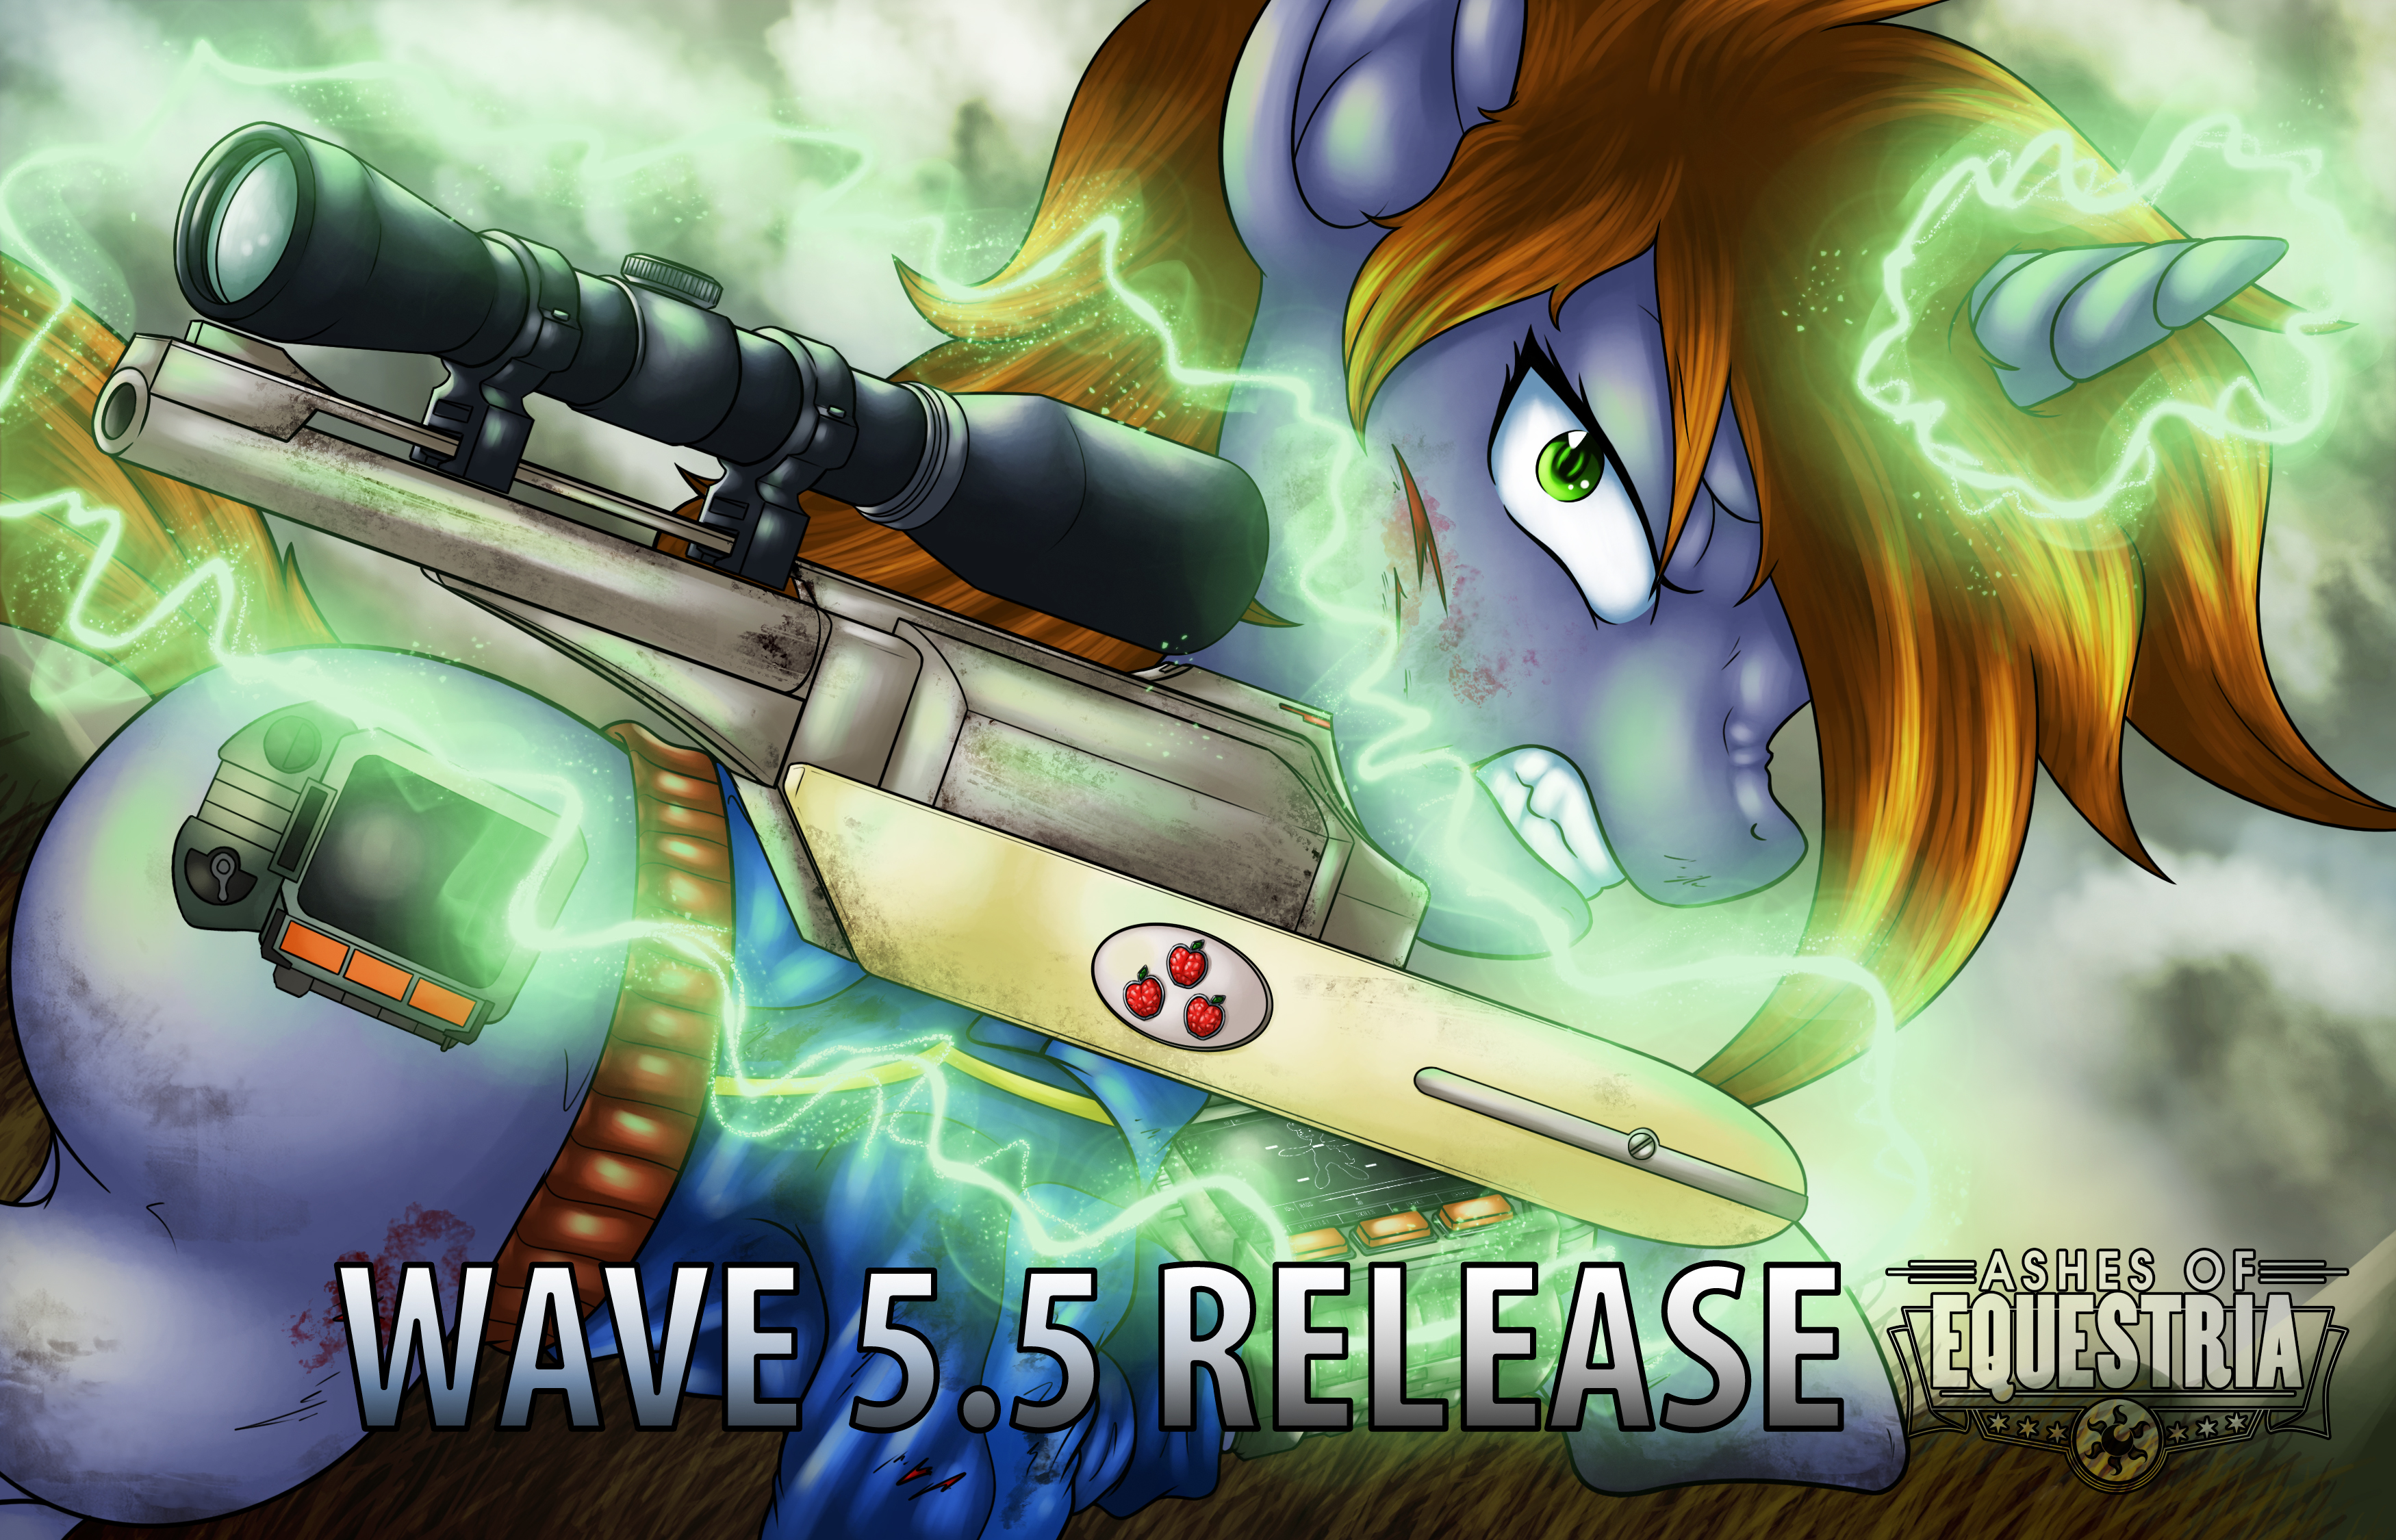 Wave 5.5 Release